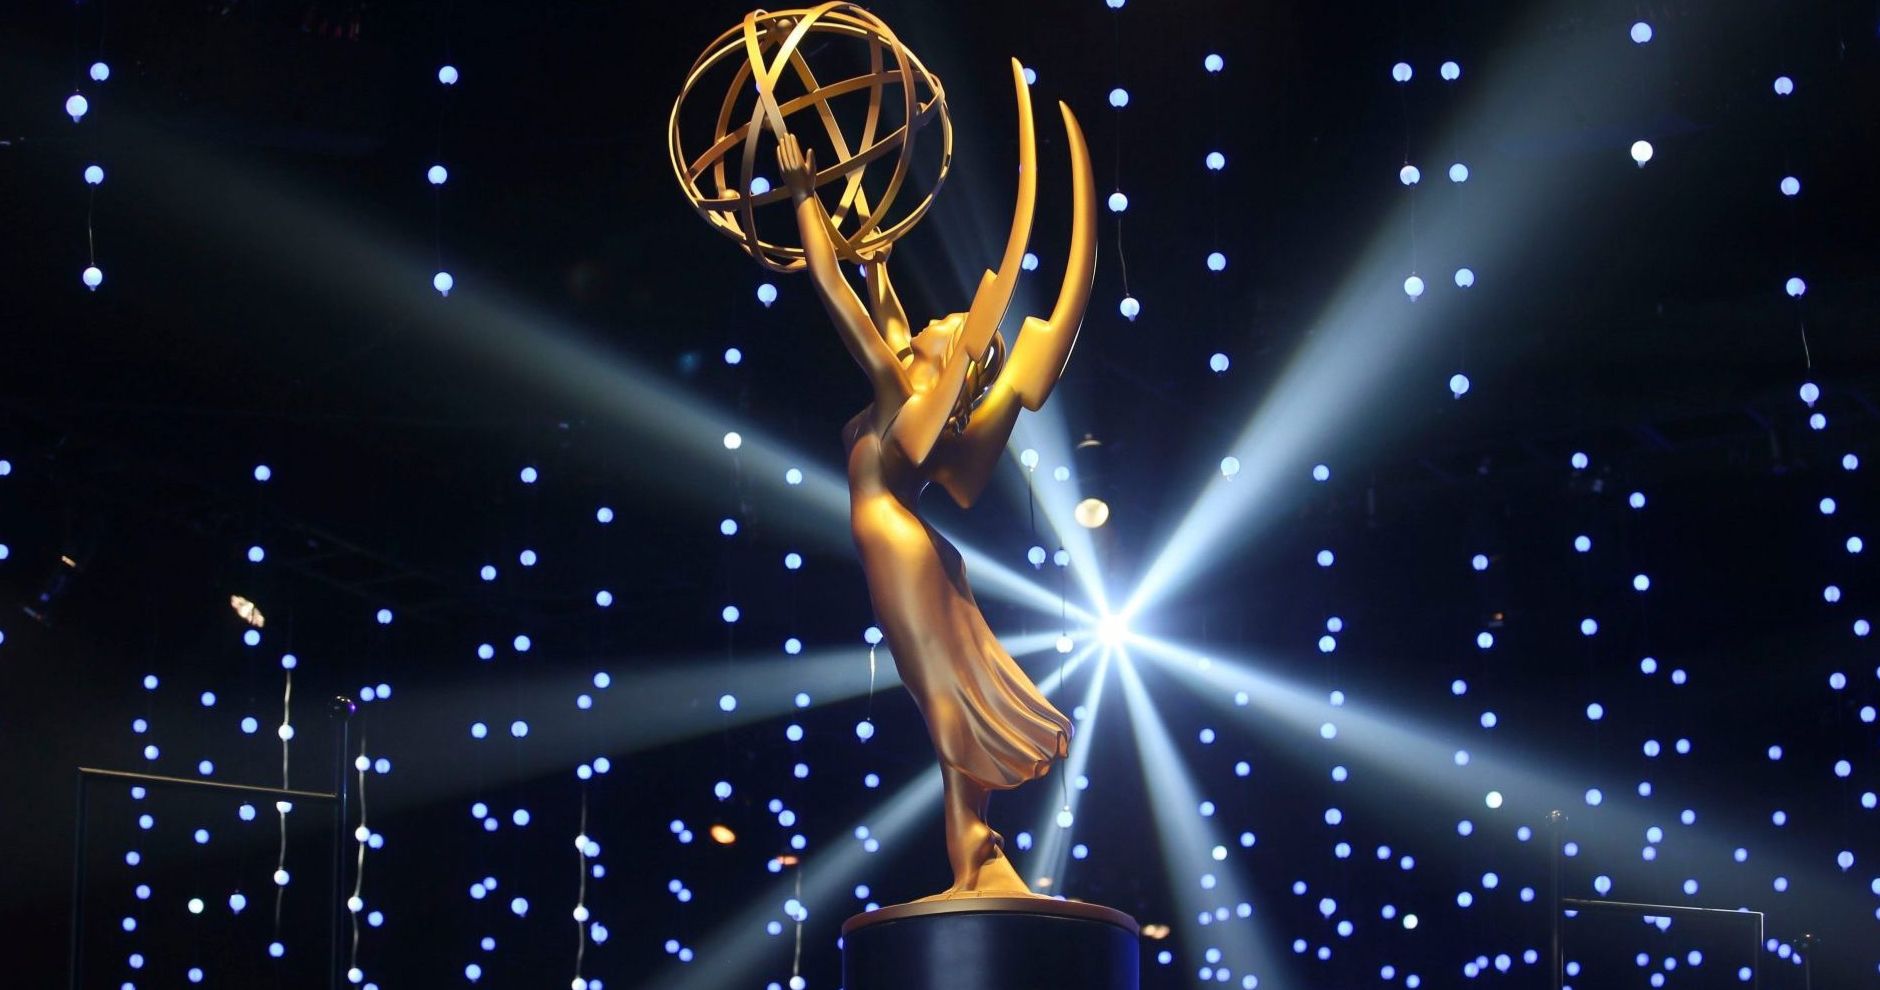 Emmys Will Follow Oscars and Go Without a Host This Year